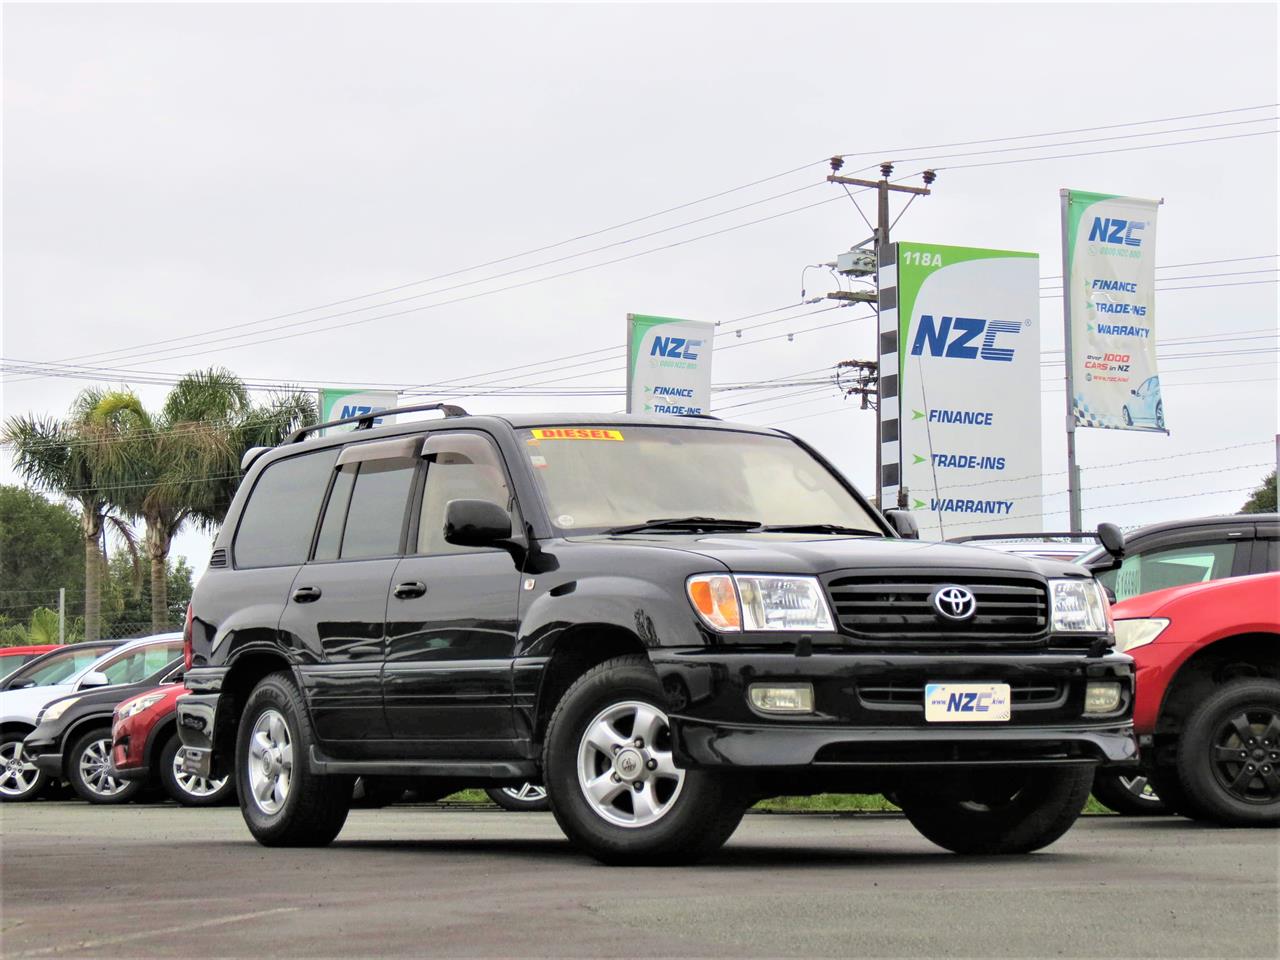 NZC best hot price for 1998 Toyota LAND CRUISER in Auckland